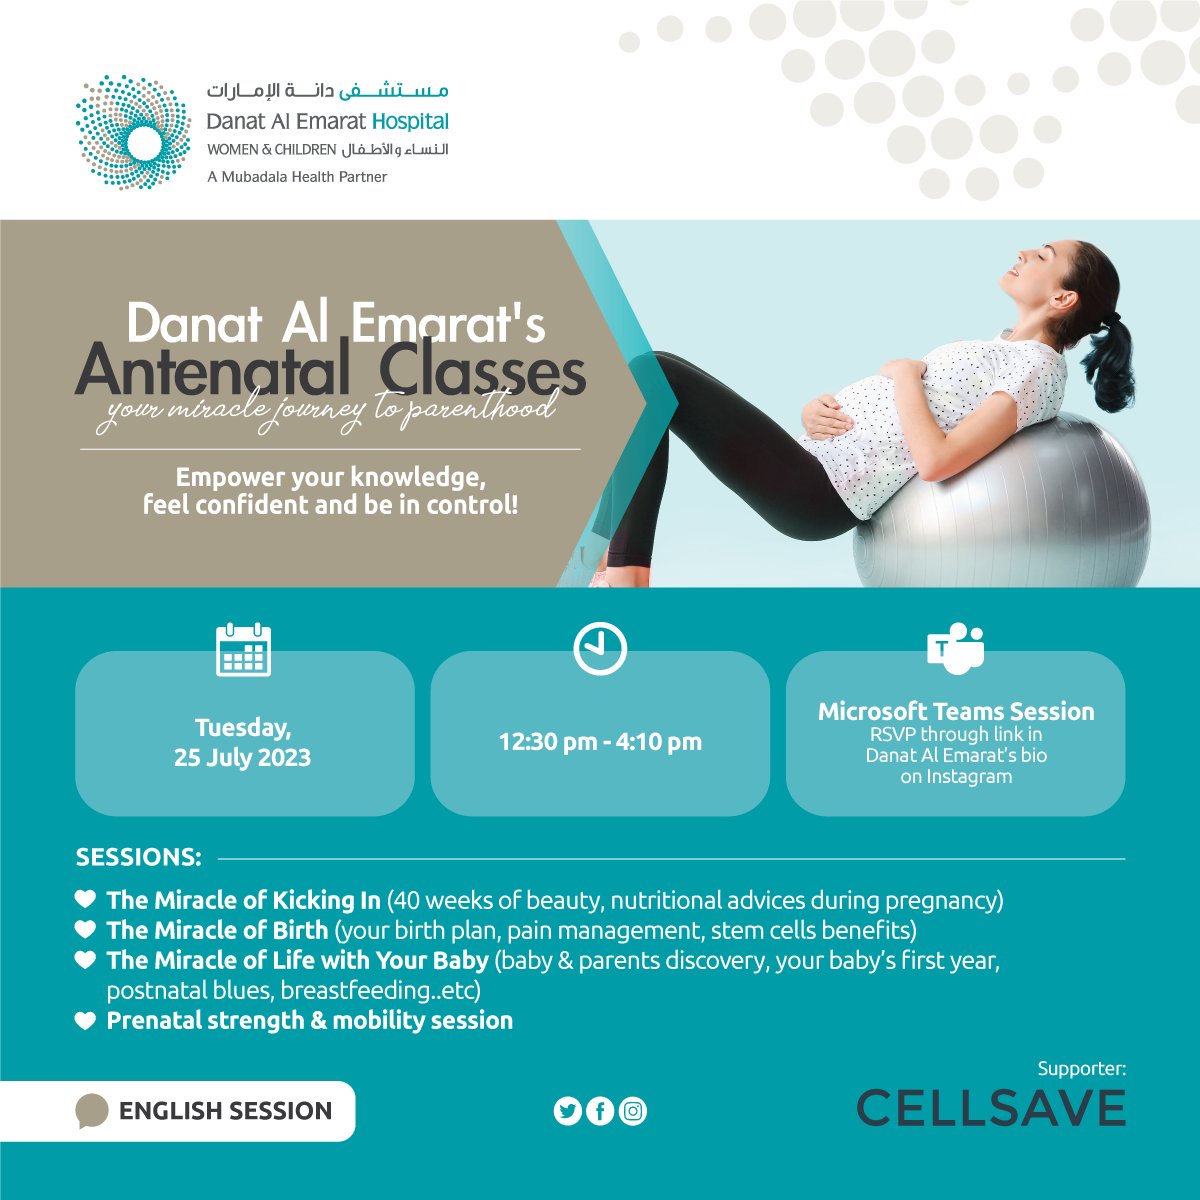 Join our virtual Antenatal Class with Danat Al Emarat Hospital on Tuesday, 25 JuLy, 12:30 pm - 4:10 pm. To register, visit link https://t.co/LhPnj6I2gI
The session will be in English language.
#AntenatalClass #Antenatal #Pregnancy #Maternity https://t.co/cCfG4WlJpG